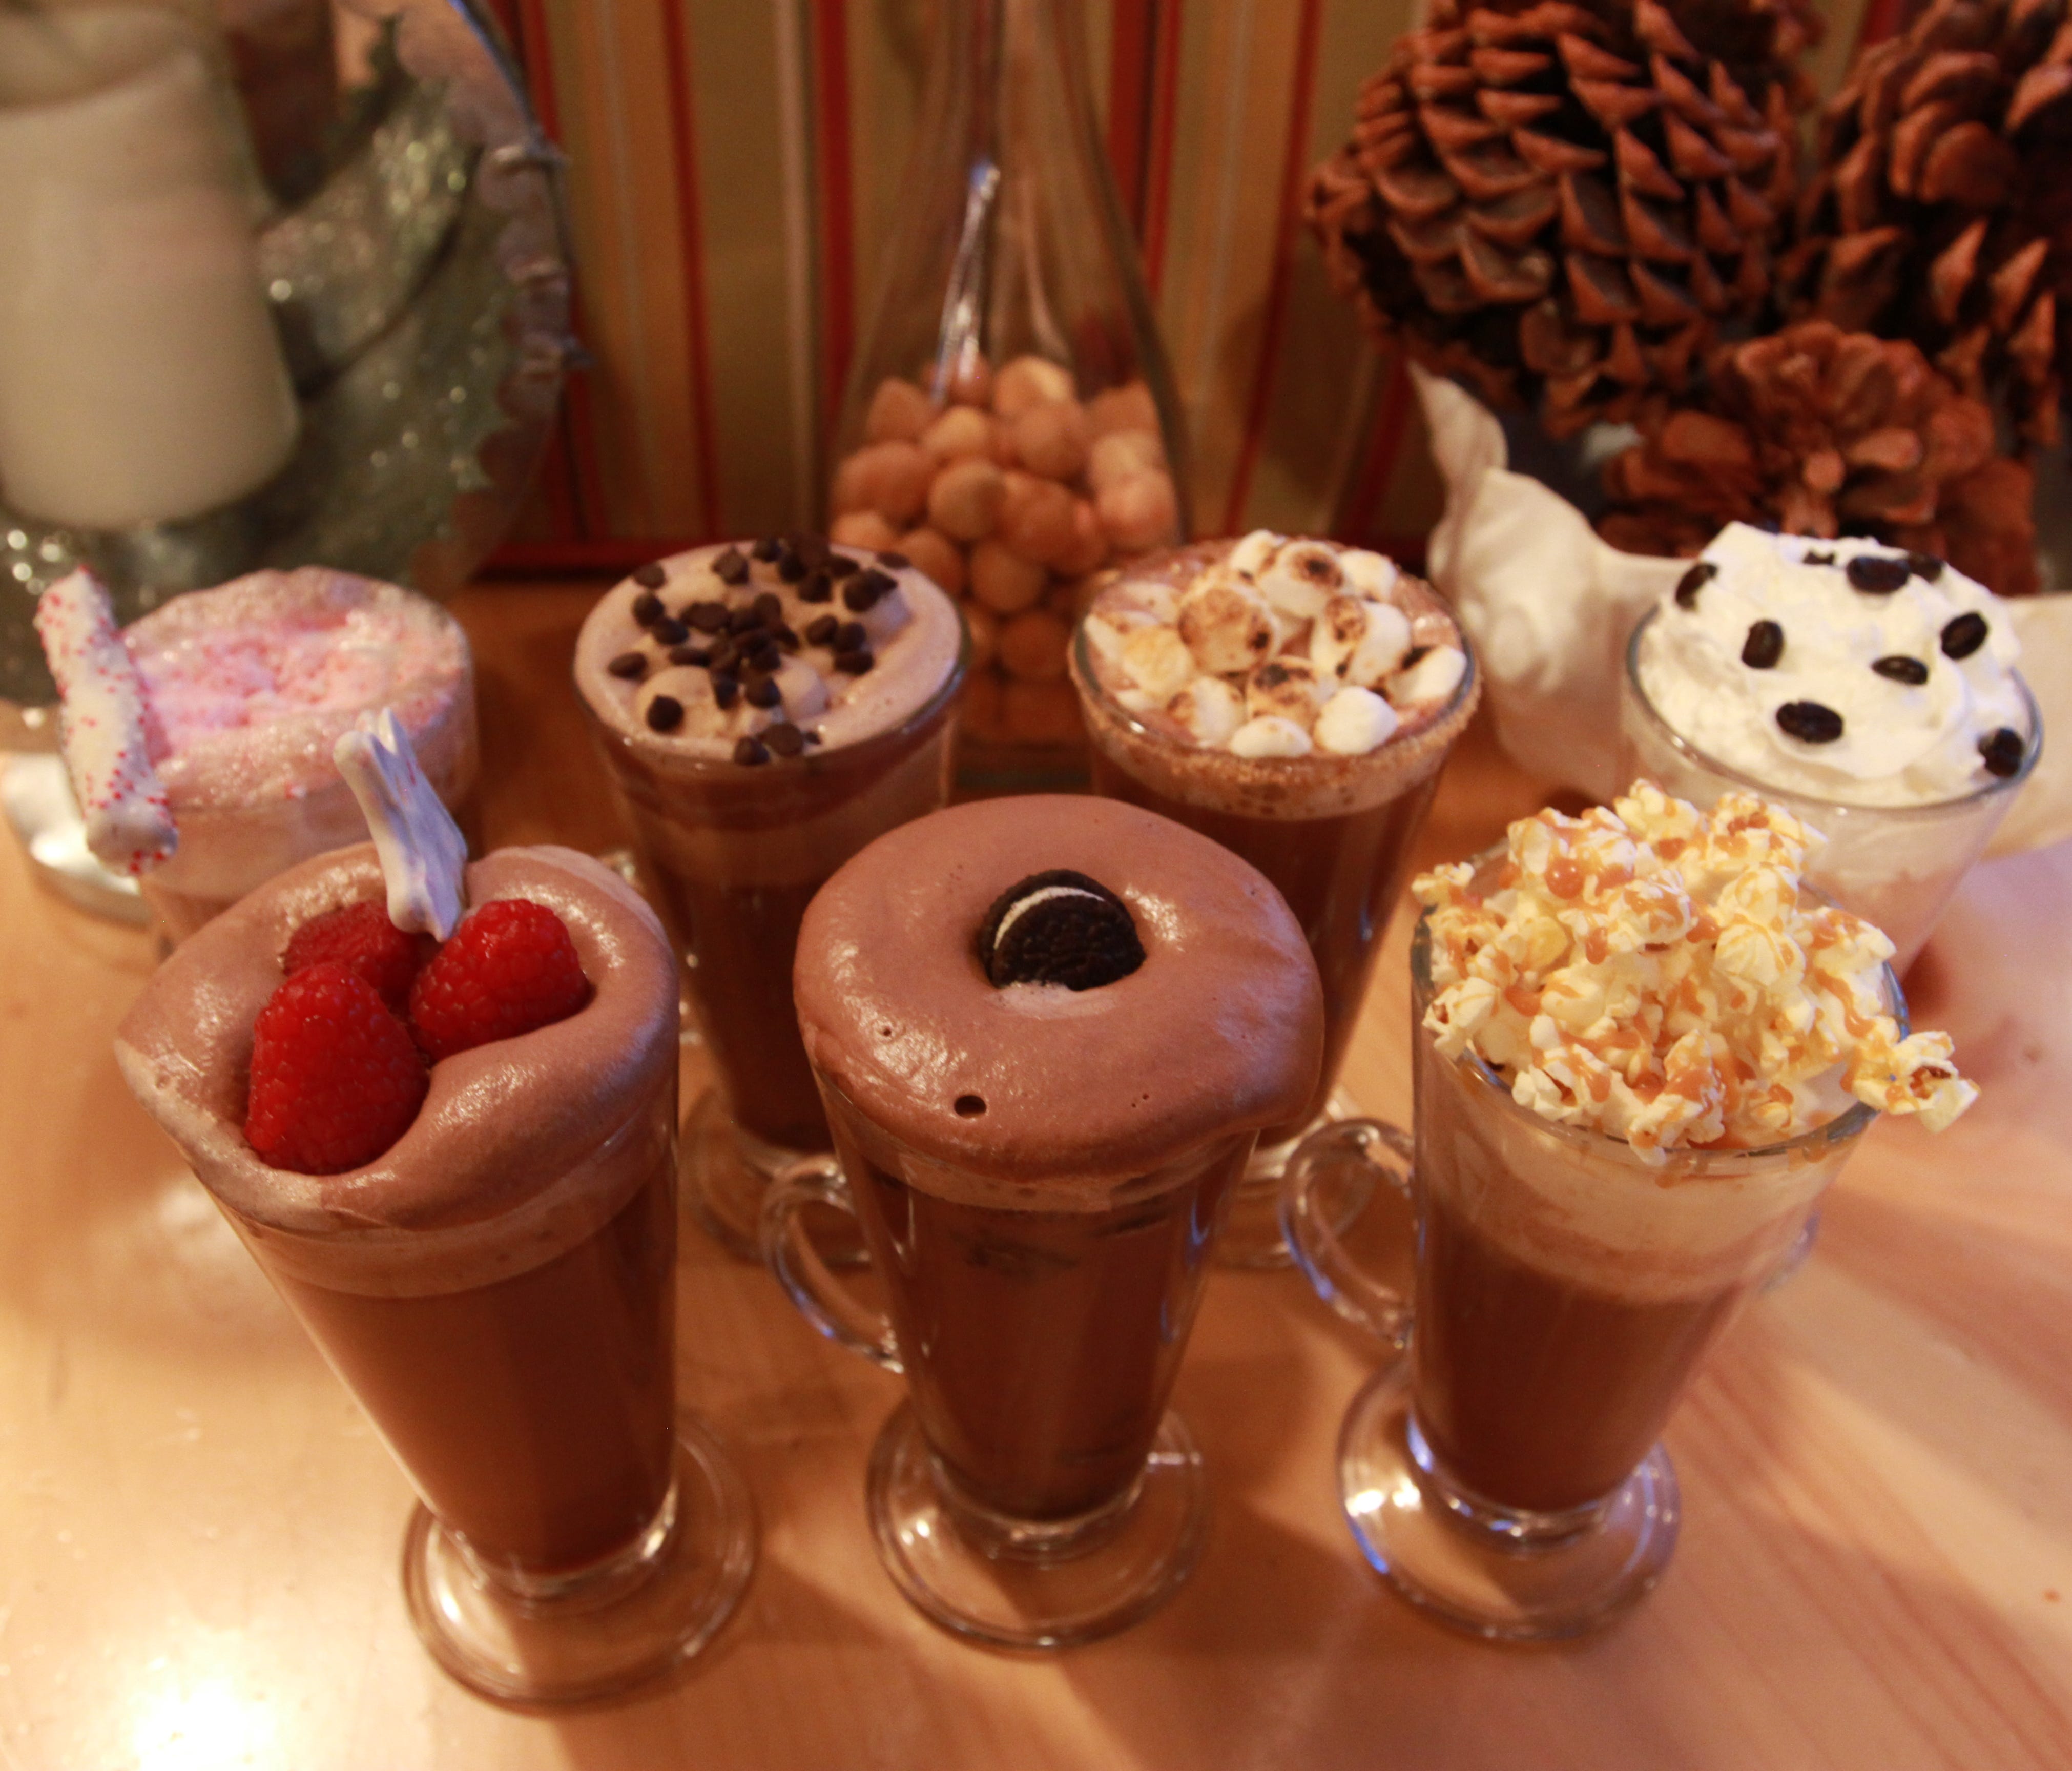 In Park City, Utah, Murdock's Cafe offers seven hot chocolate concoctions showcasing popcorn, Oreo, peanut butter and raspberry.